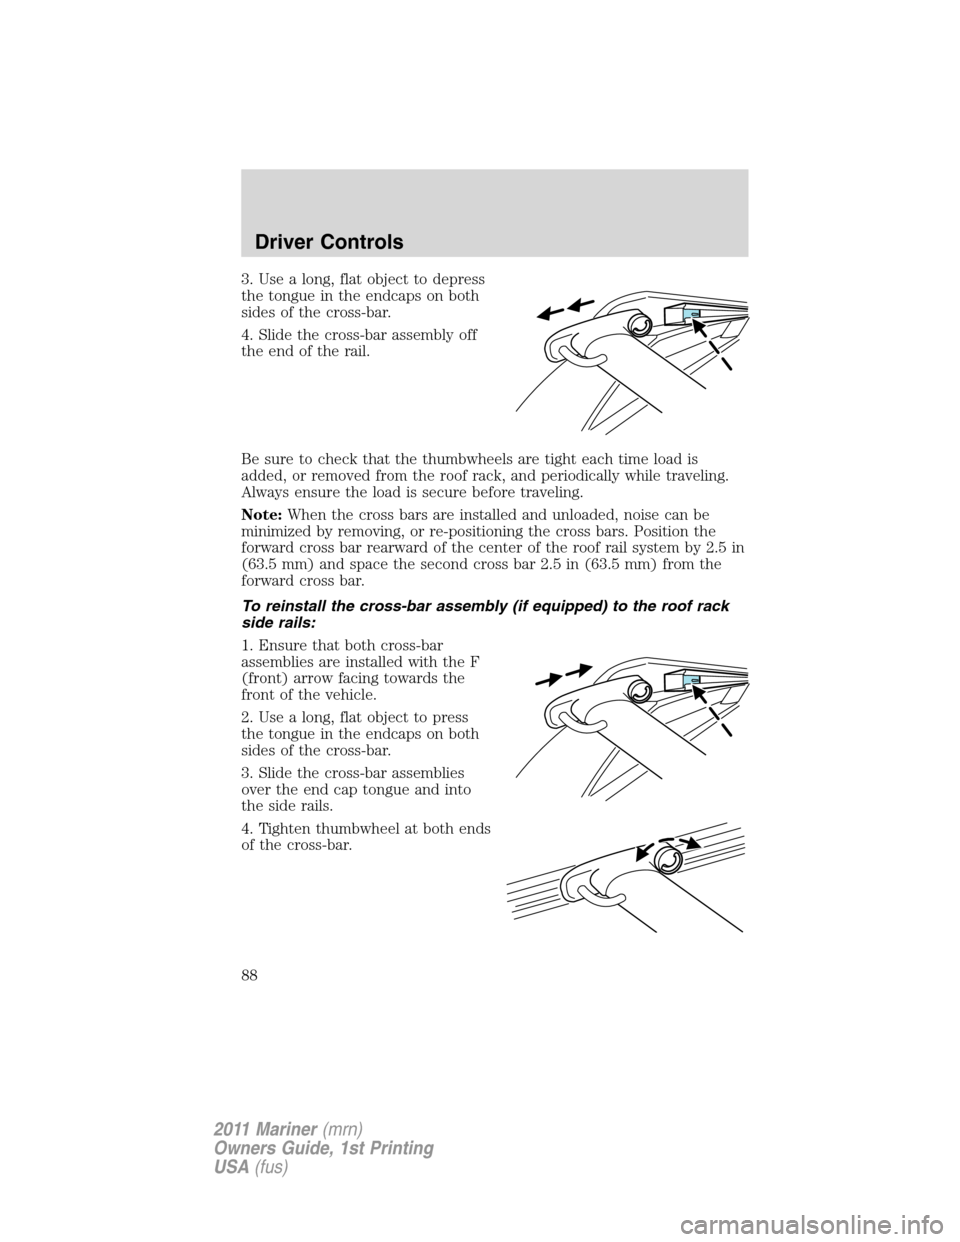 Mercury Mariner 2011  Owners Manuals 3. Use a long, flat object to depress
the tongue in the endcaps on both
sides of the cross-bar.
4. Slide the cross-bar assembly off
the end of the rail.
Be sure to check that the thumbwheels are tight